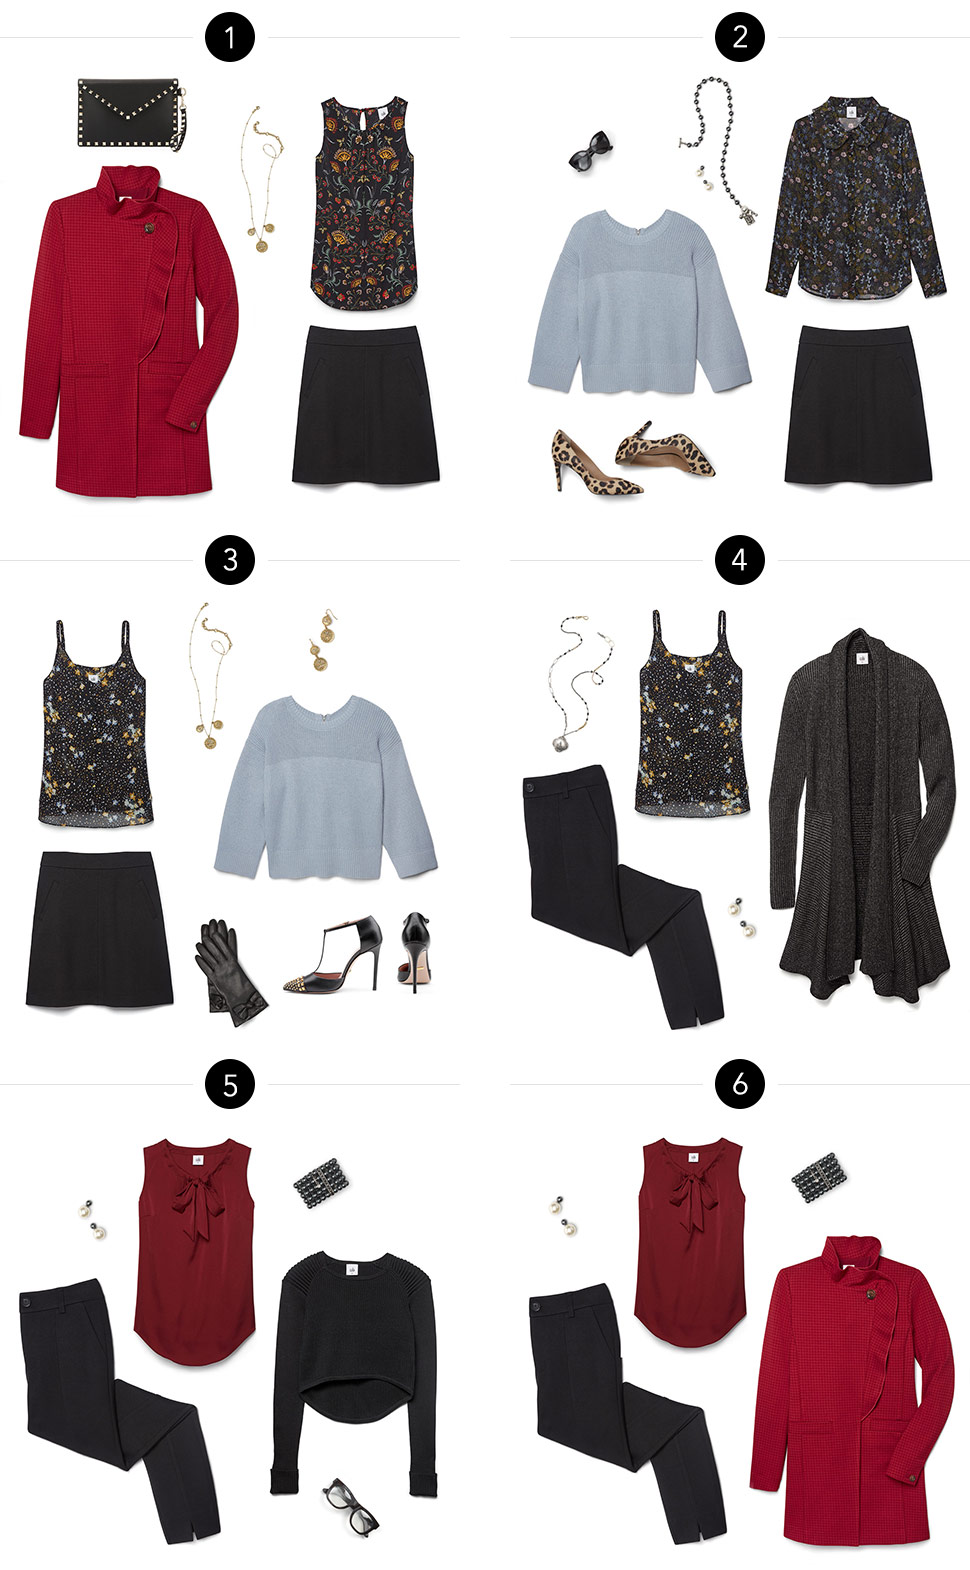 cabi-Clothing-30-fall-outfit-ideas